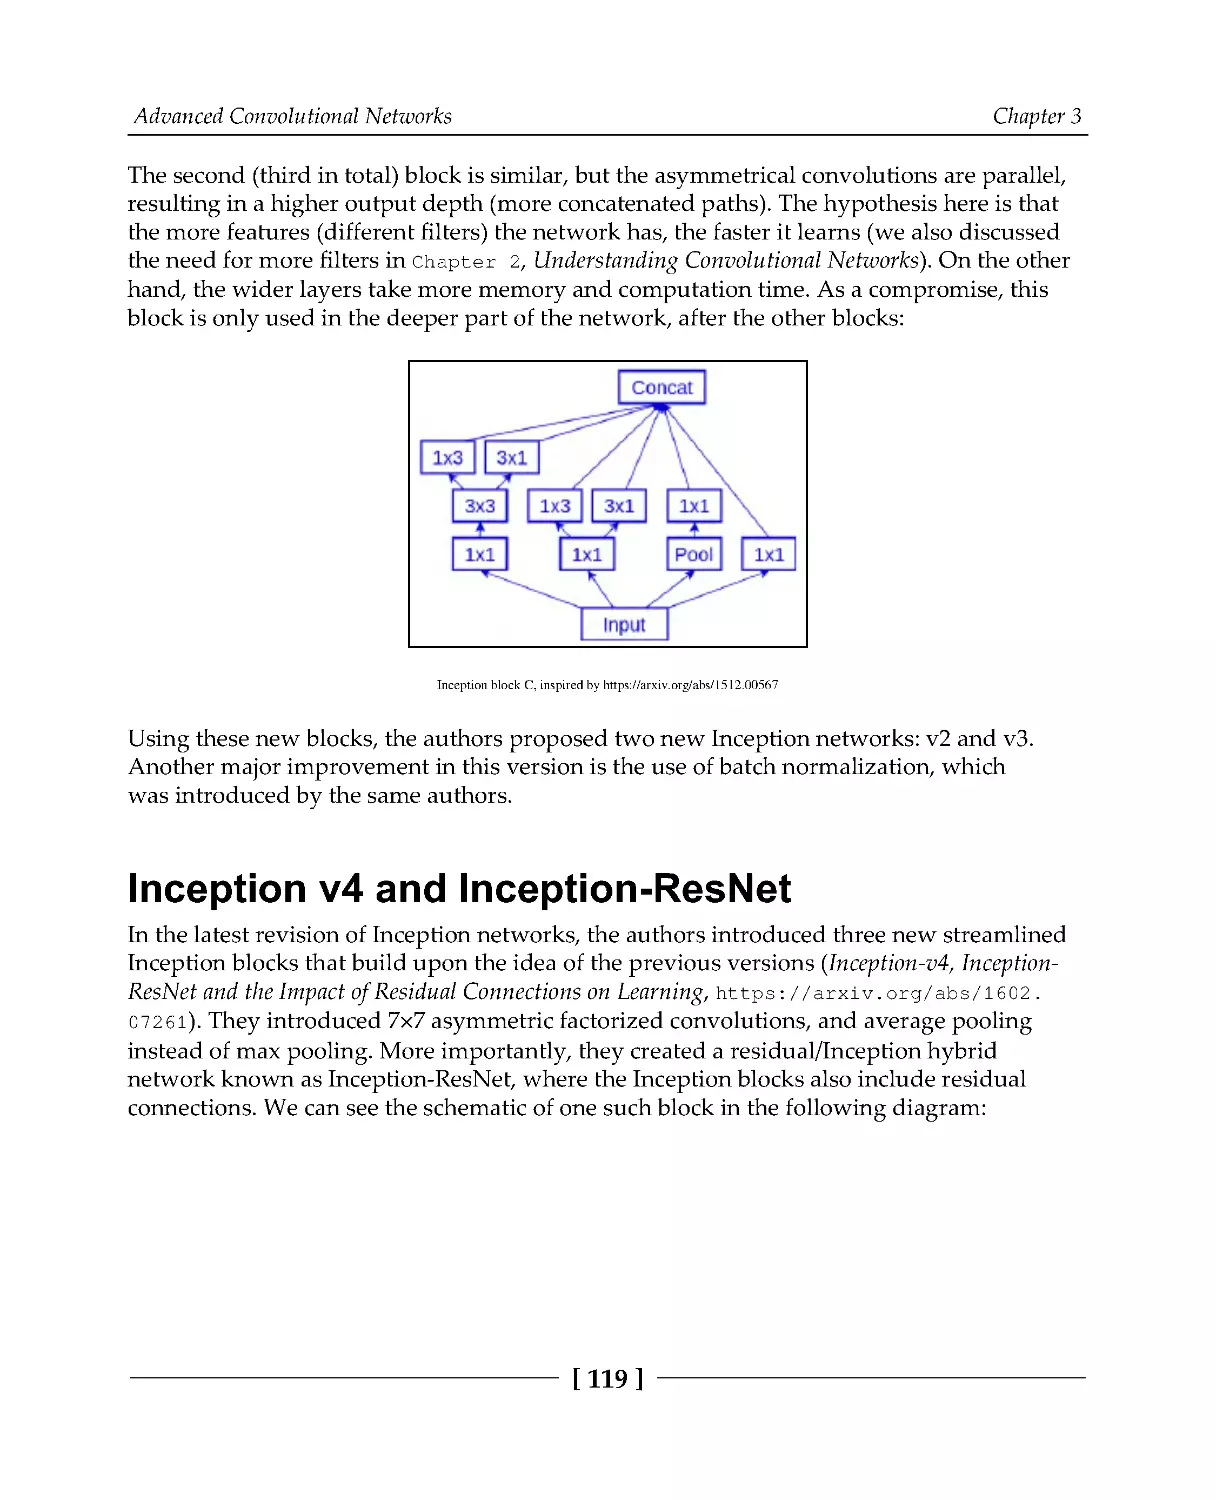 Inception v4 and Inception-ResNet